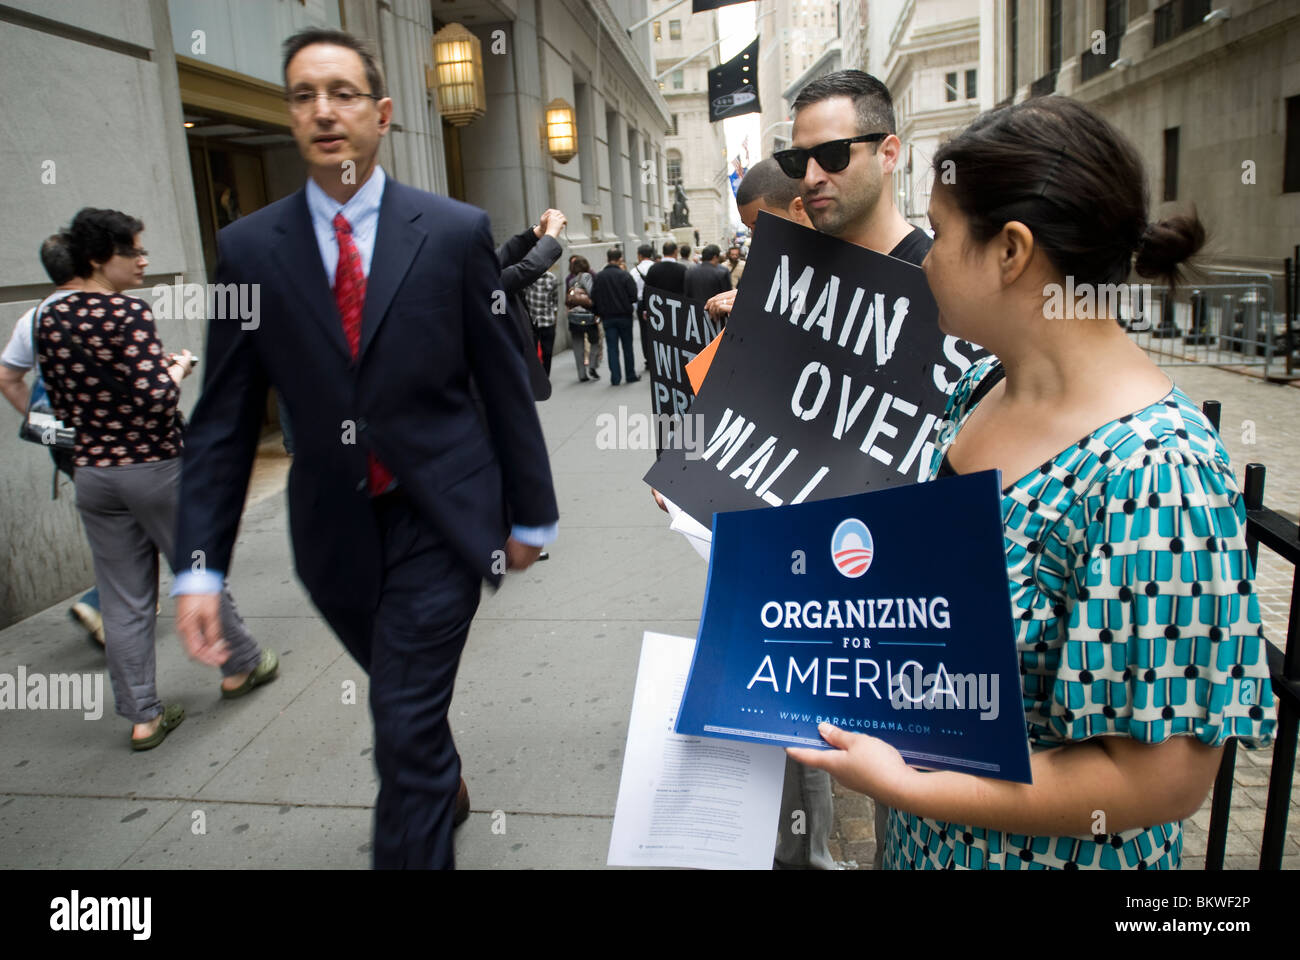 Members of the group Organizing for America protests in front of the New York Stock Exchange Stock Photo